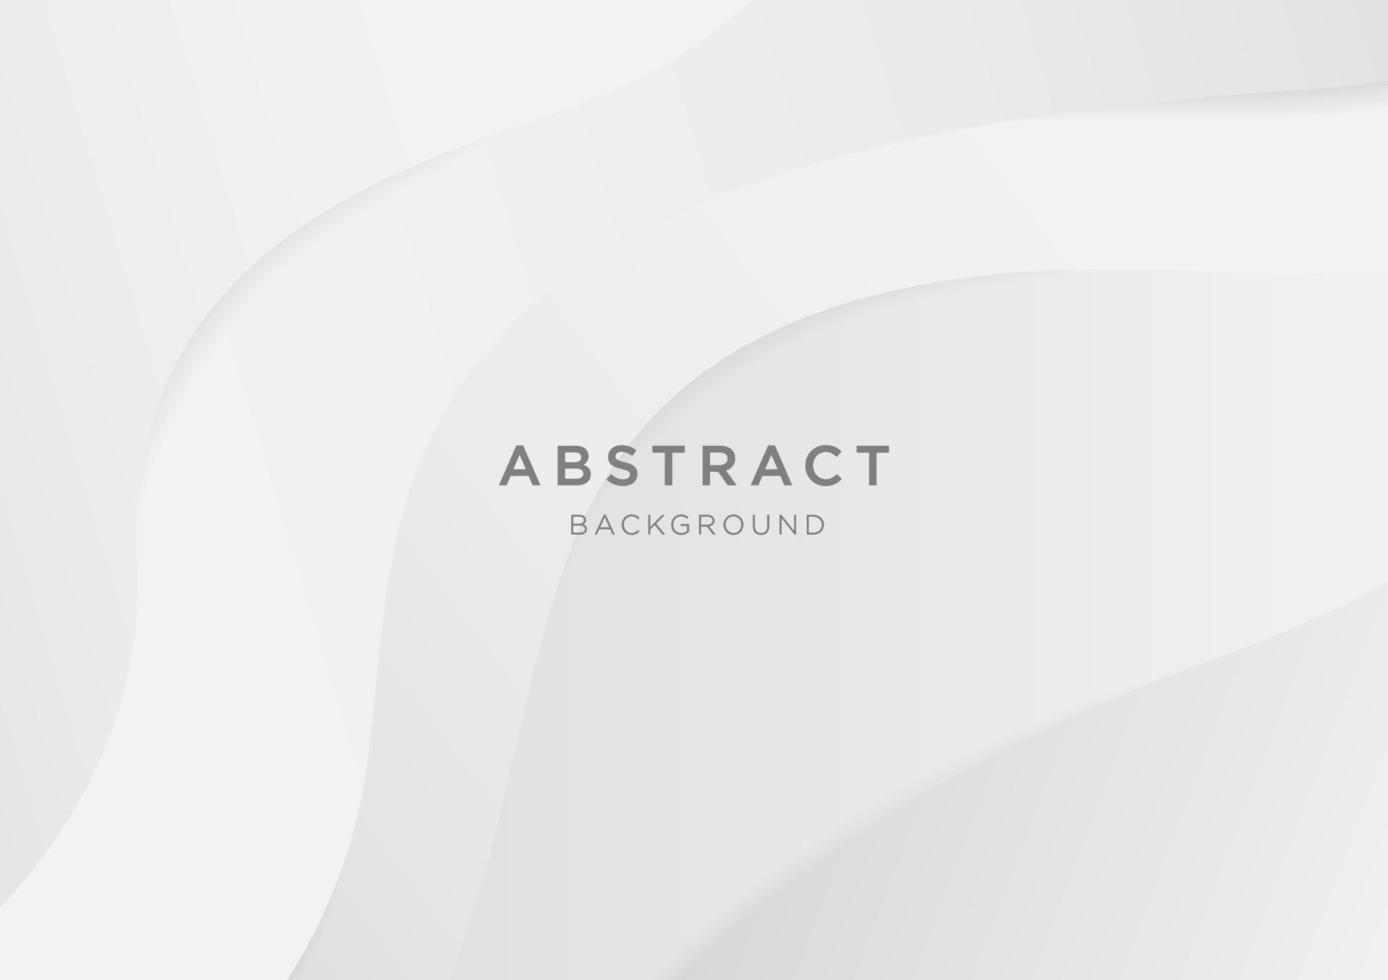 Abstract vector white and gray gradient color curve background